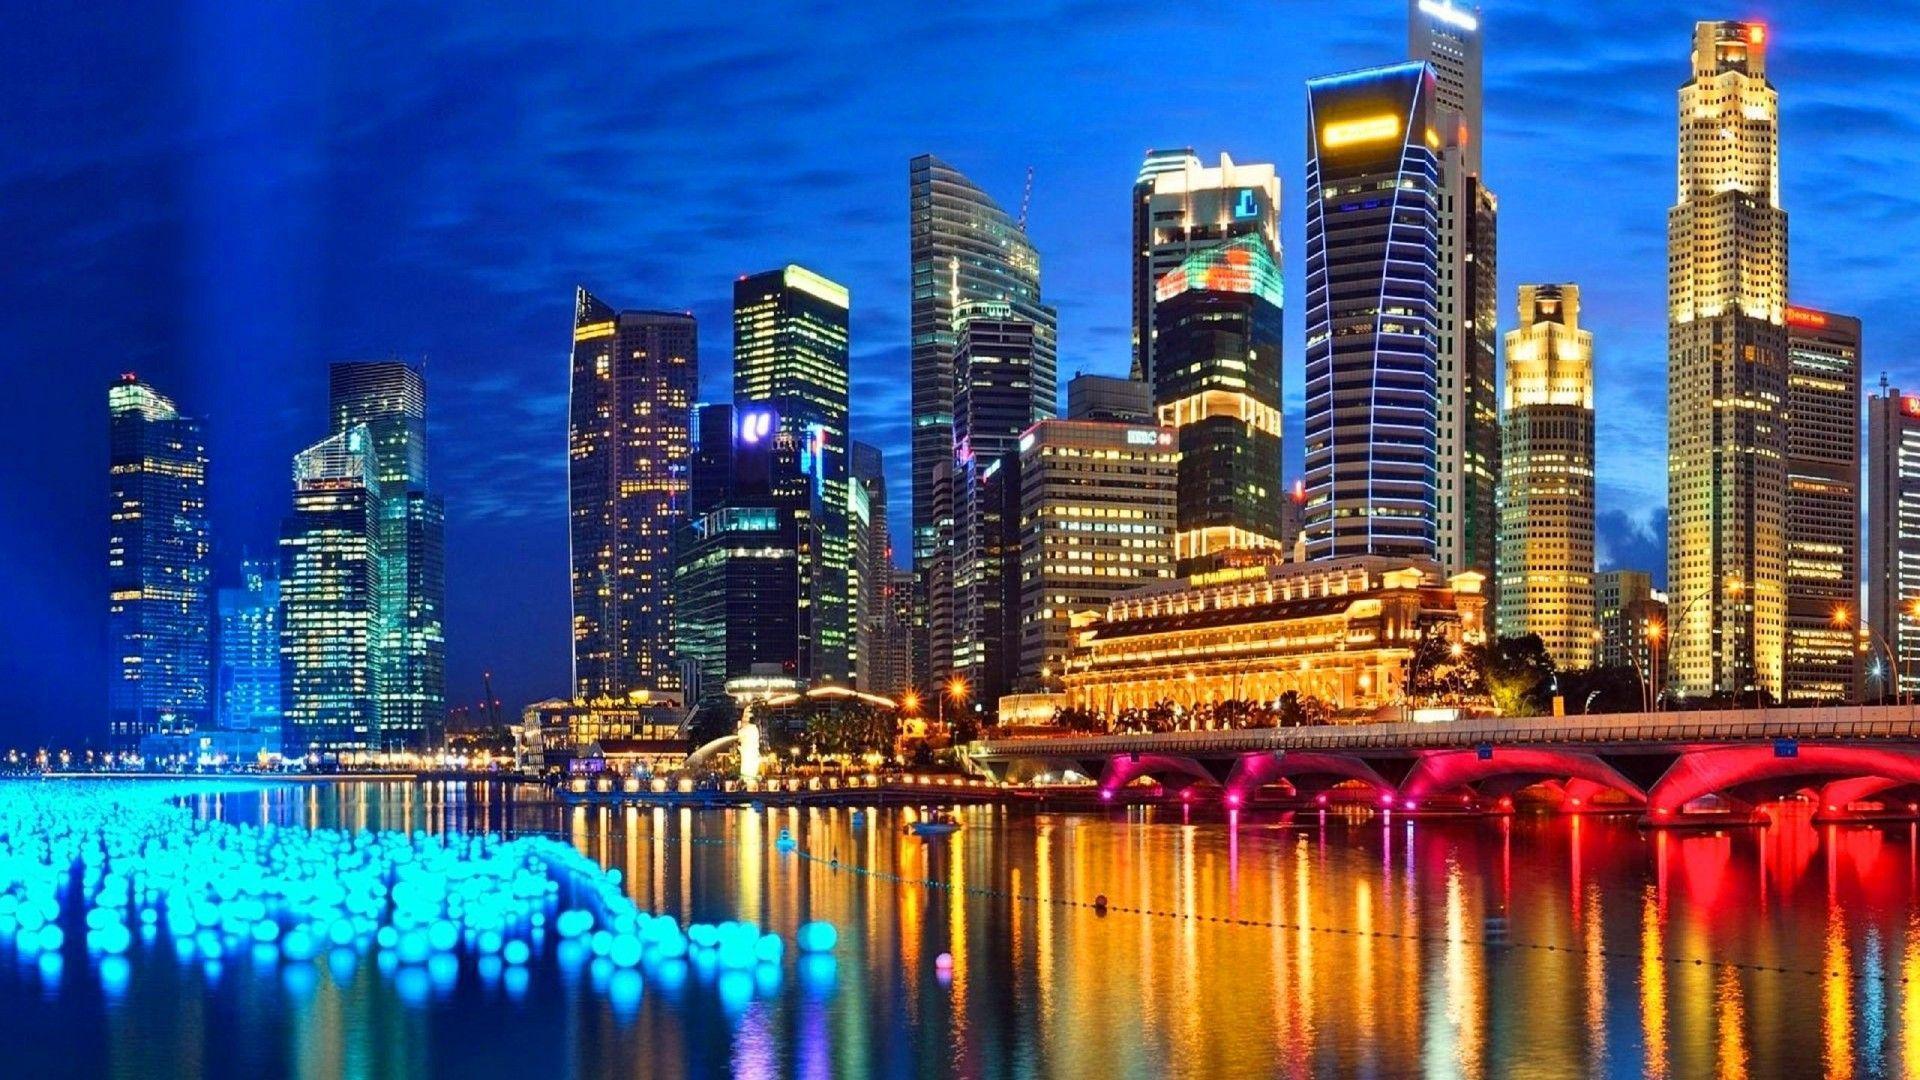 Singapore the city of lions HD Wallpaper Free Download